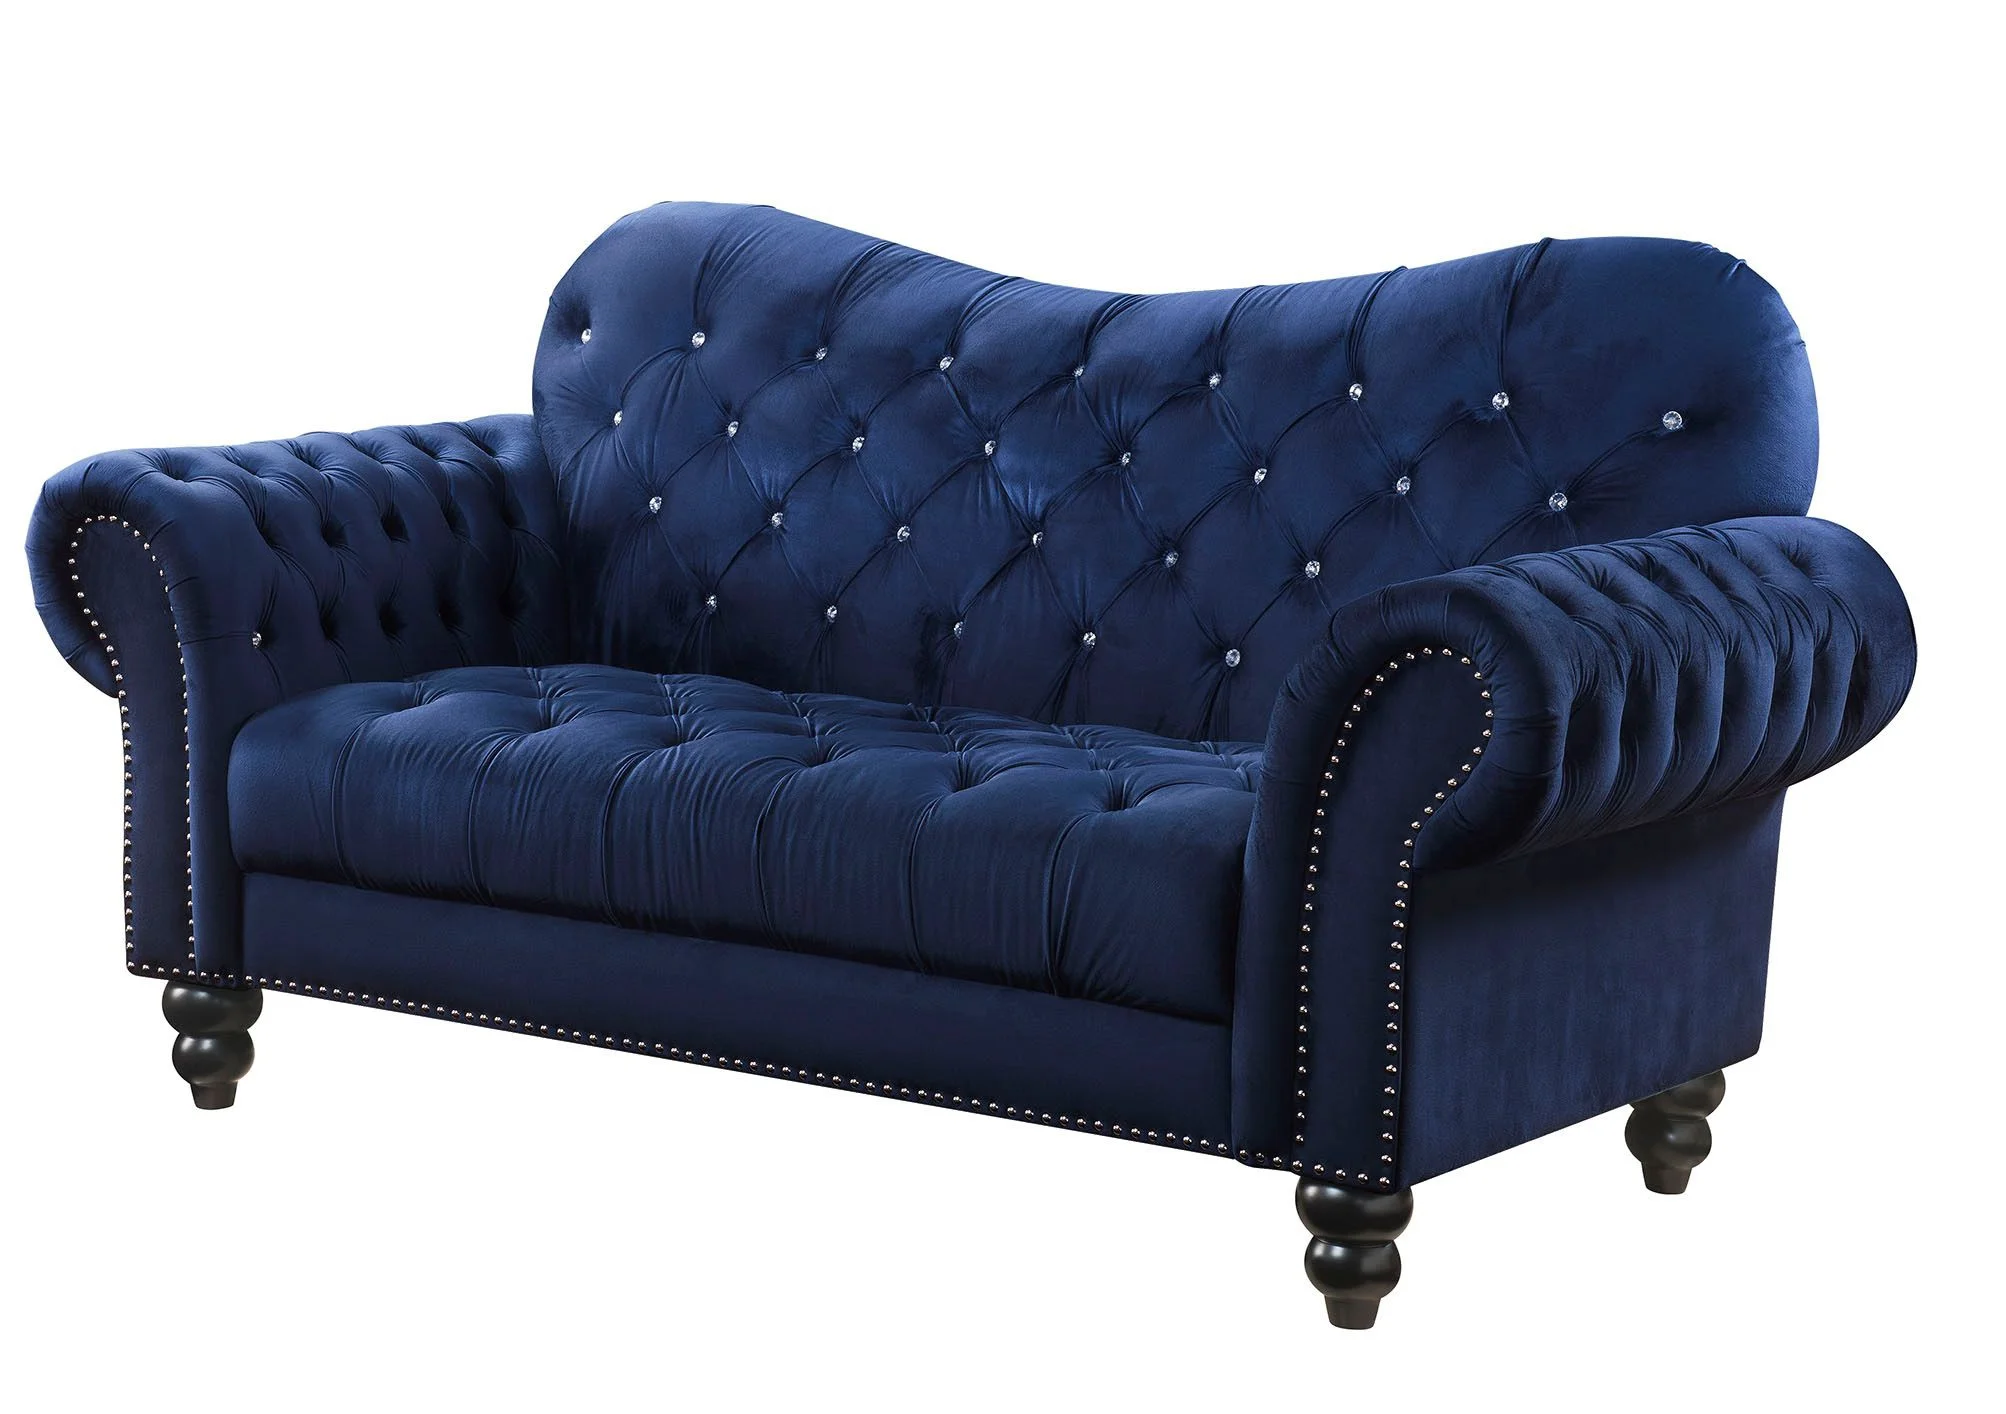 Vintage Traditional Home Sofa Furniture Loveseat Two Seaters in Navy Velvet Elegant and Eye-catching 76"L x 37"D x 39"H